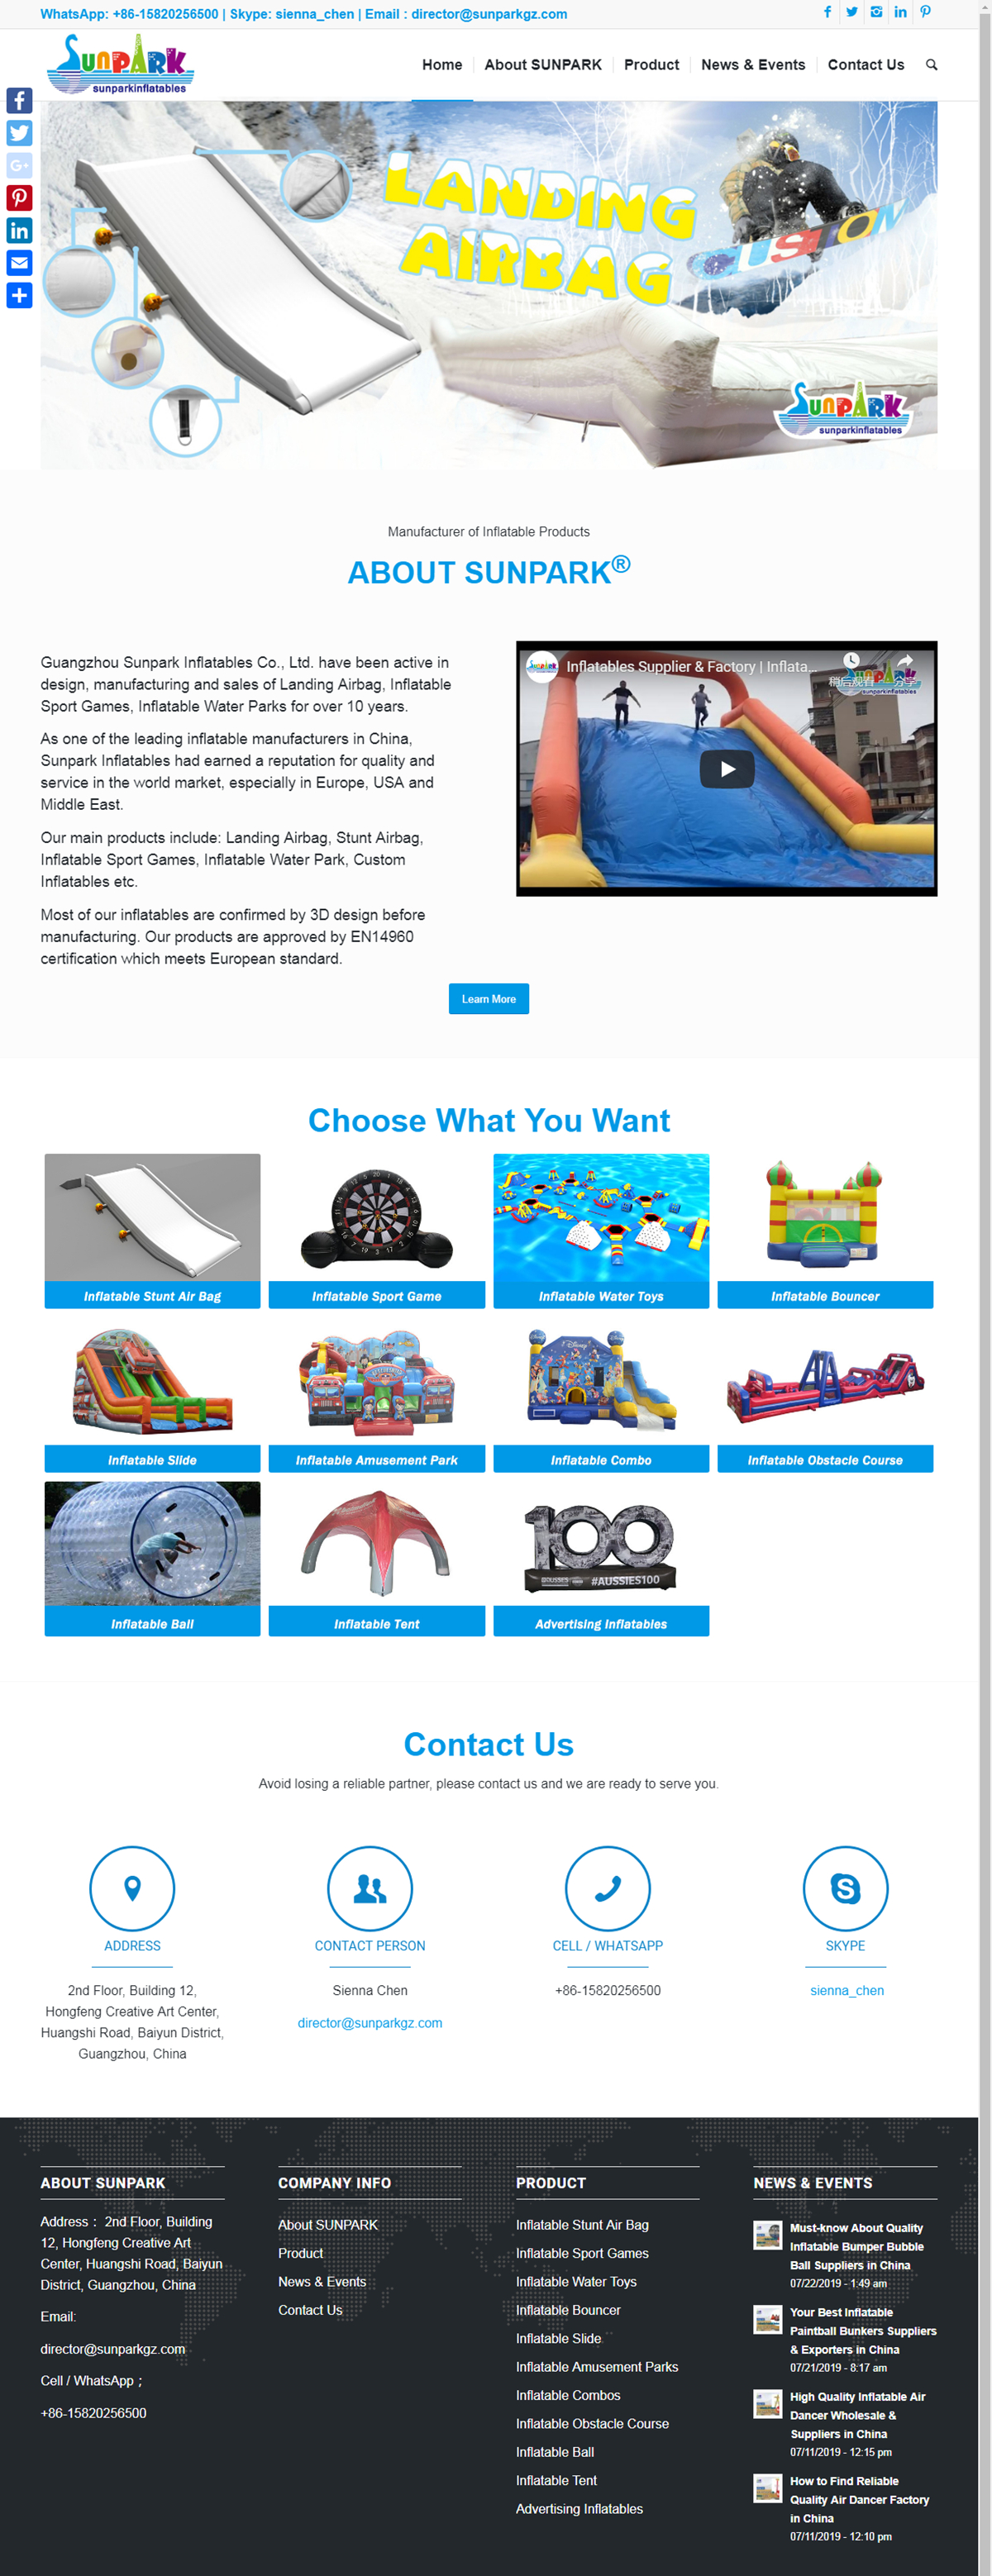 China Inflatables Factory, Manufacturer of Inflatable Water Park_SUNPARK_副本.jpg